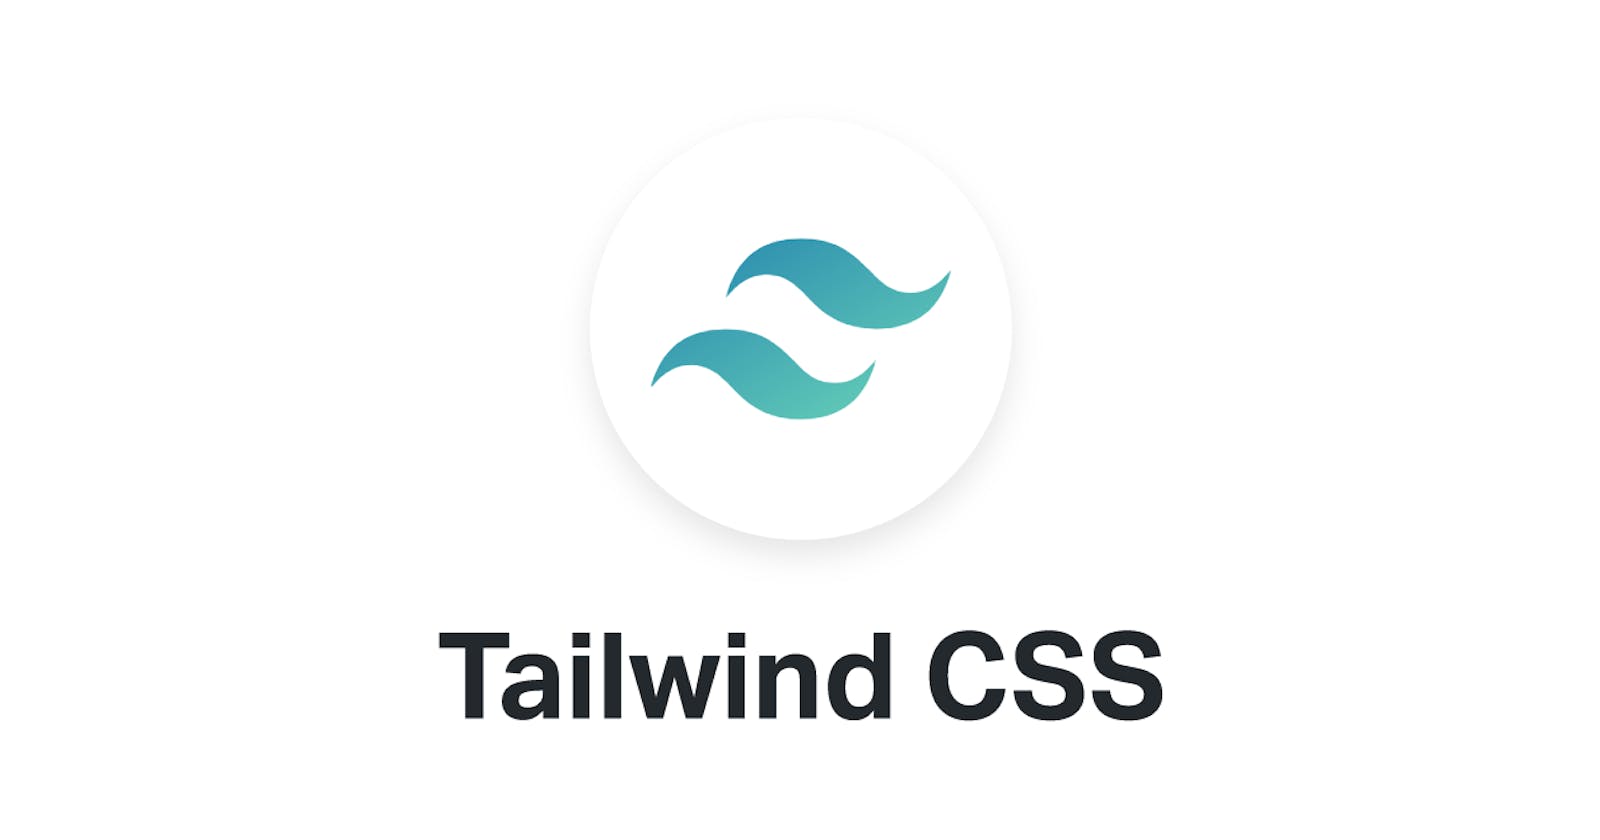 Why I Love Tailwind CSS with React